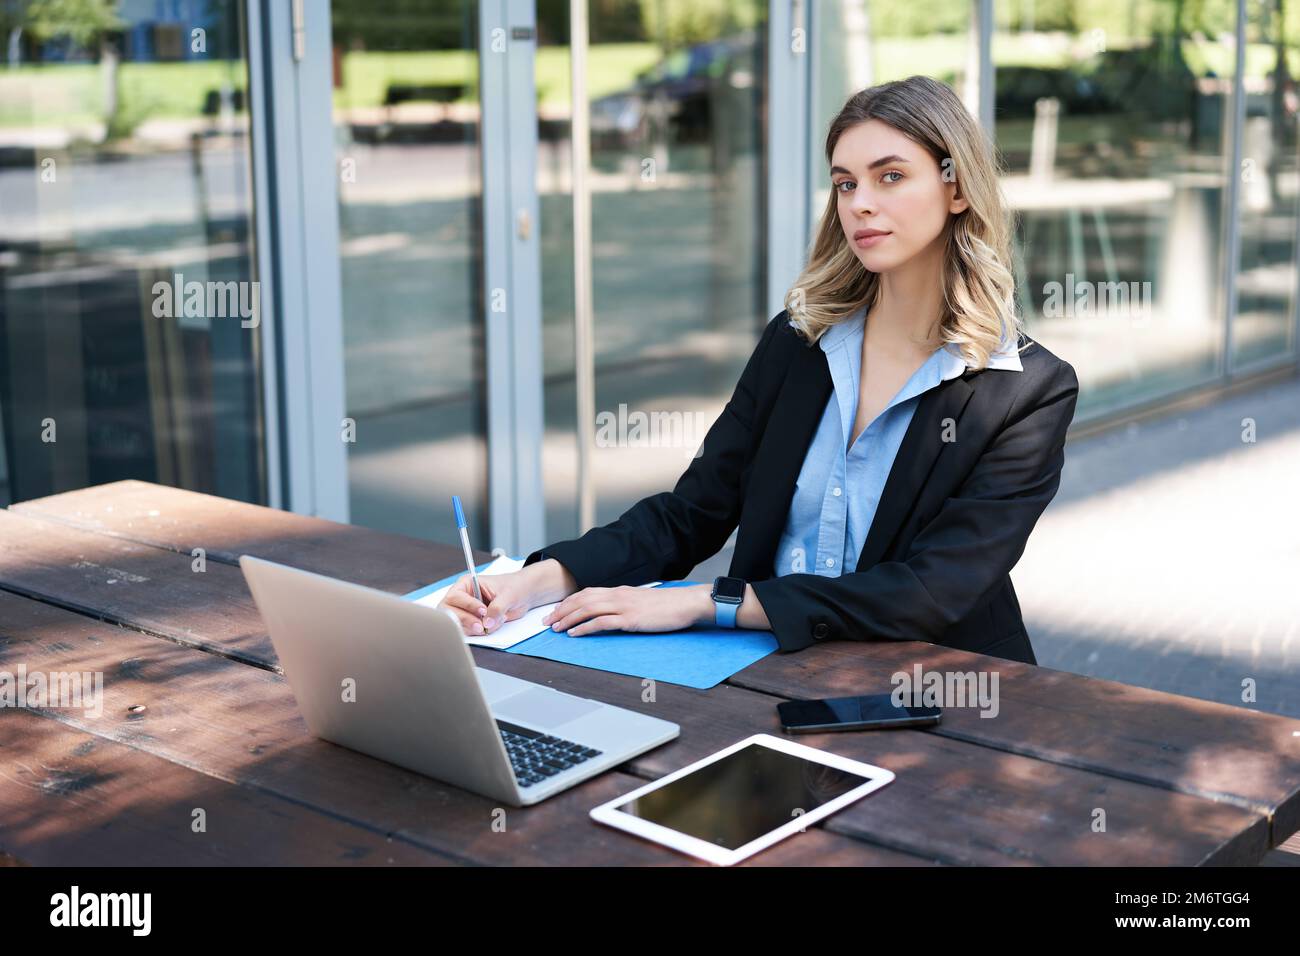 Successful businesswoman working outdoors. Corporate woman sitting on bench with laptop, writing, taking notes during work meeti Stock Photo